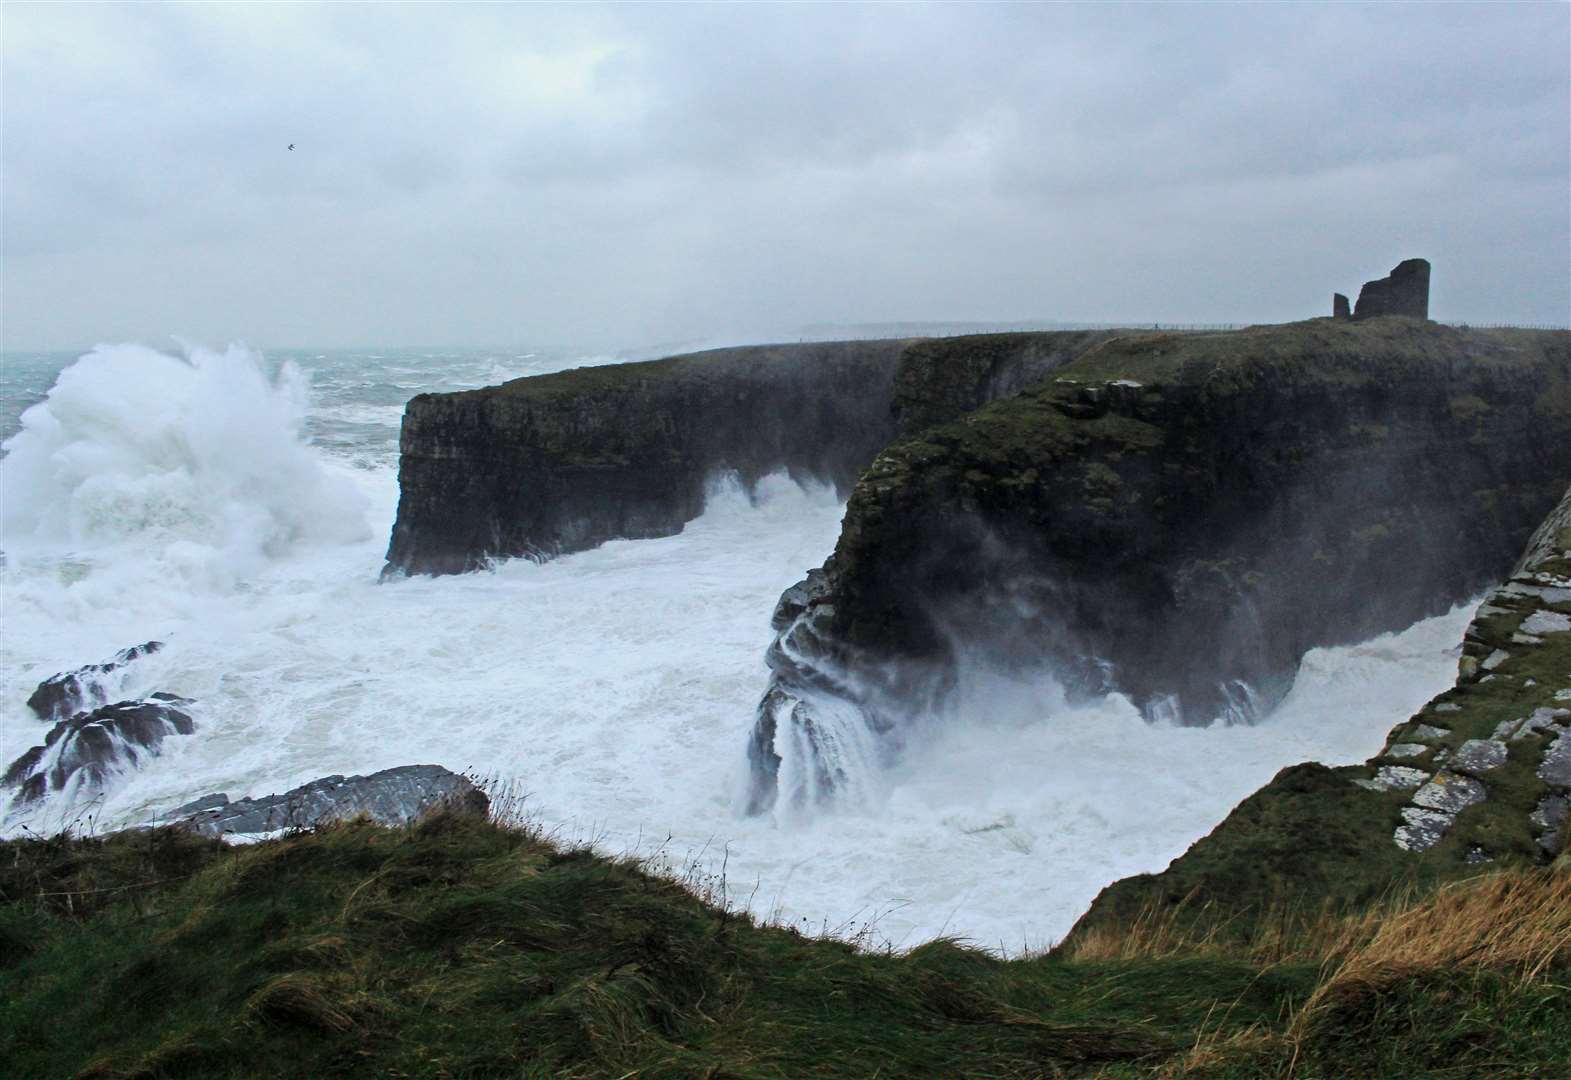 Stormy seas off the east coast of Caithness. Picture: Alan Hendry